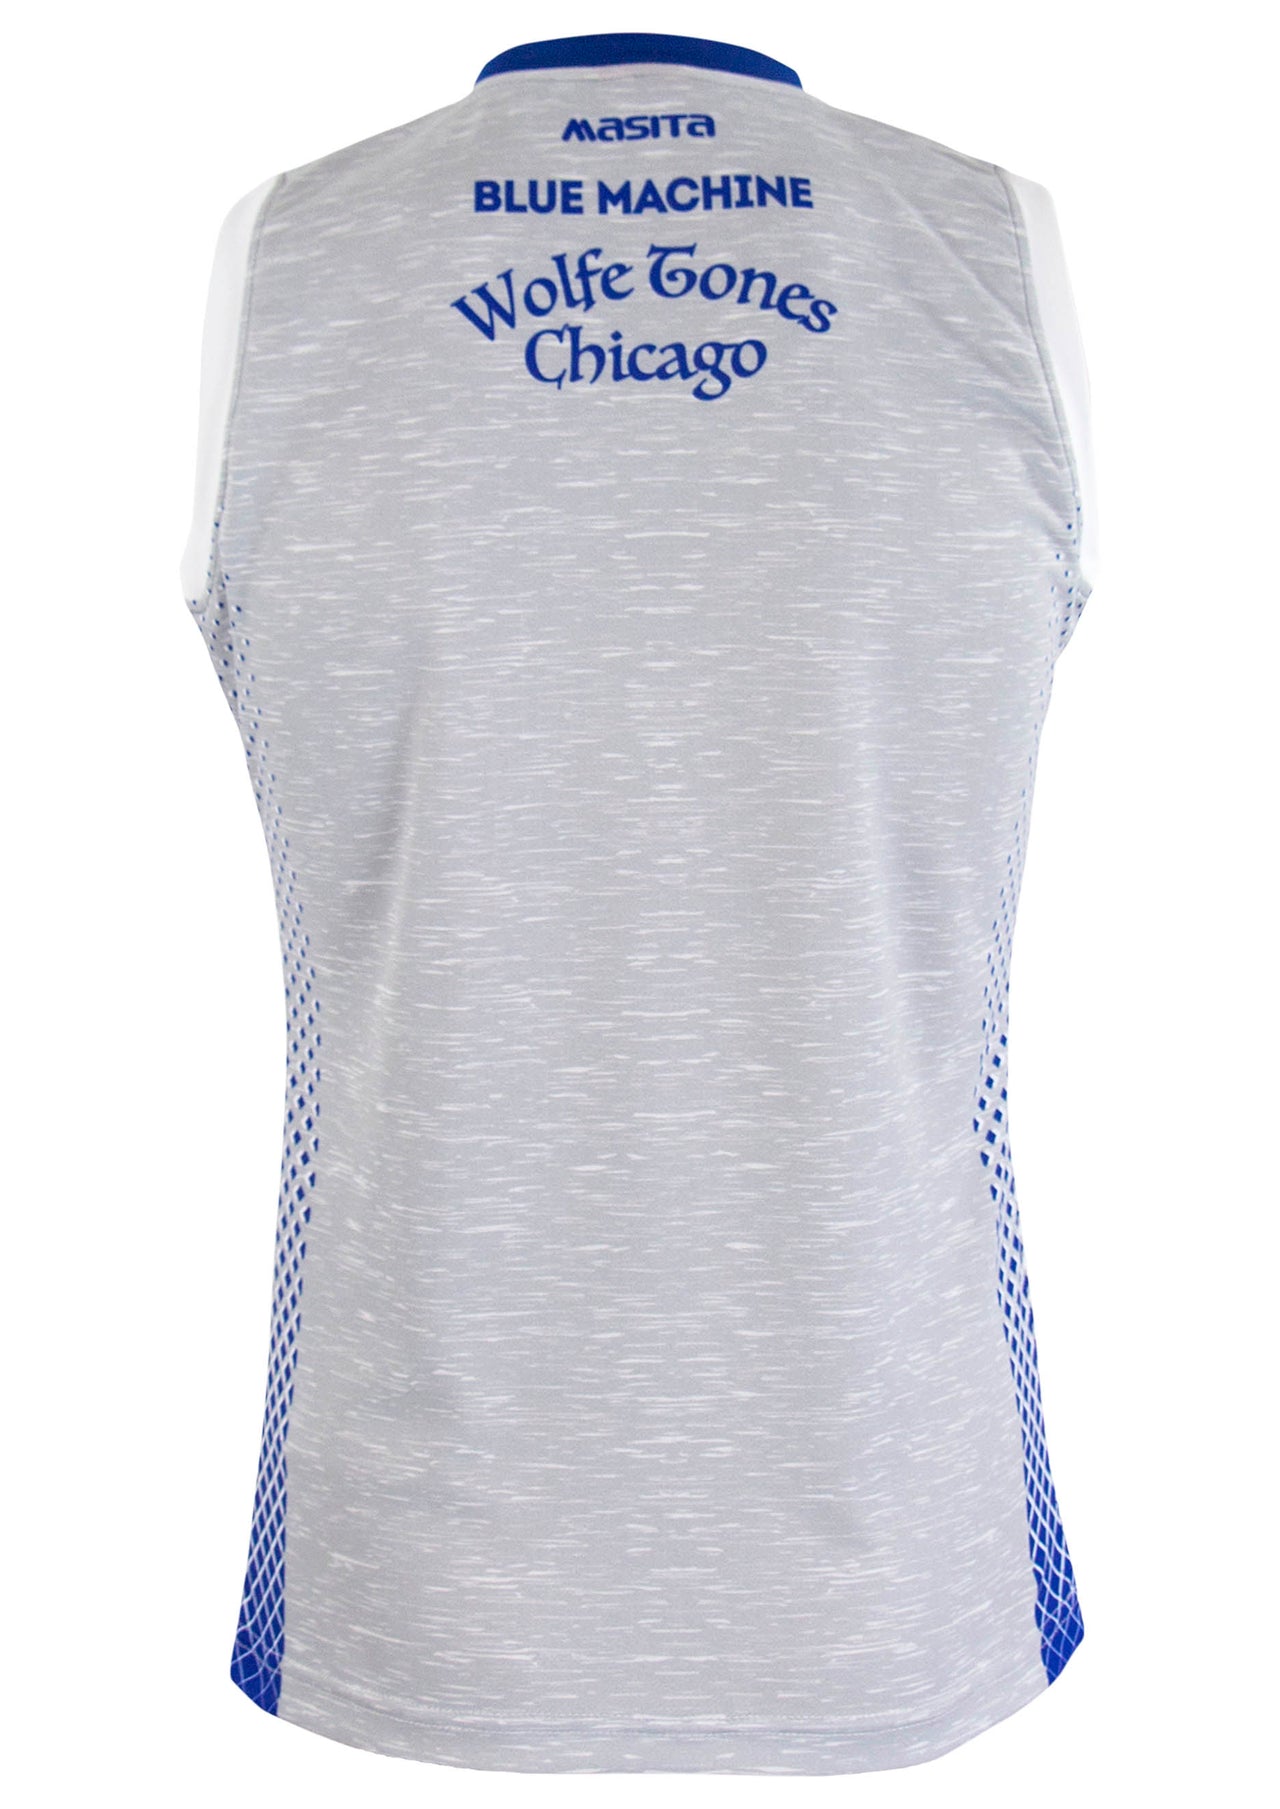 Chicago Wolfe Tones Home Sleeveless Shirt Regular Fit Adult